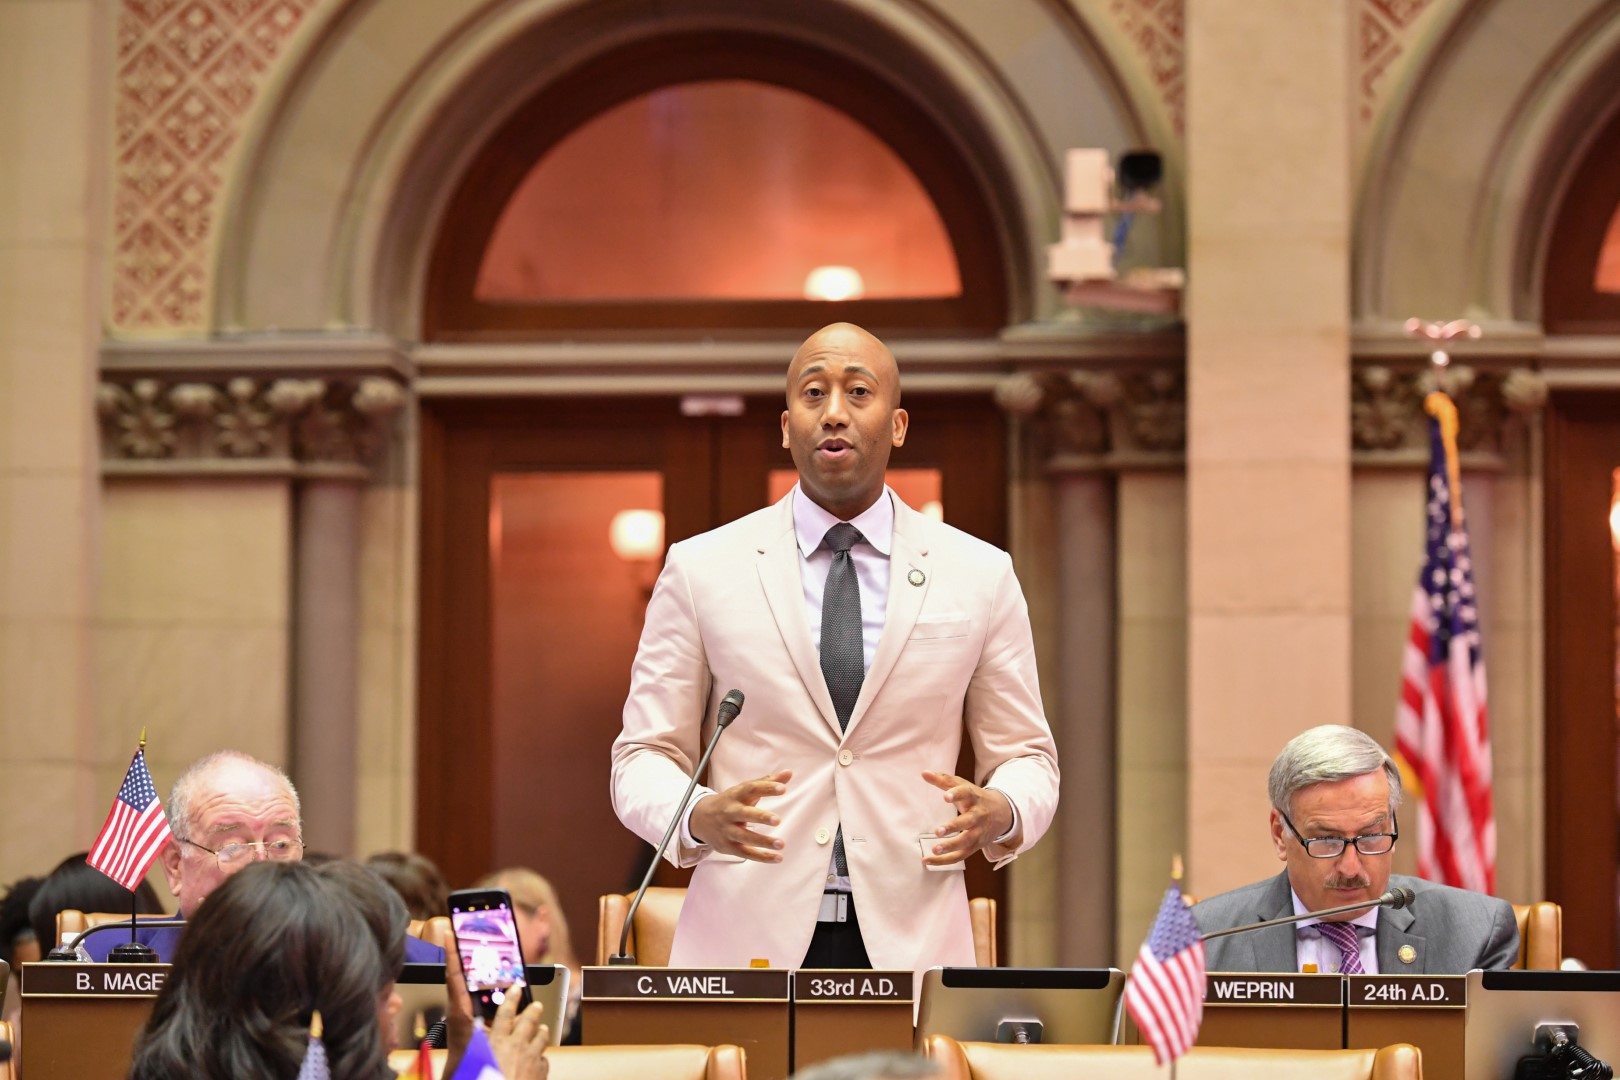 Assembly member Vanel debating on the creation of the Digital Currency Task Force Bill.